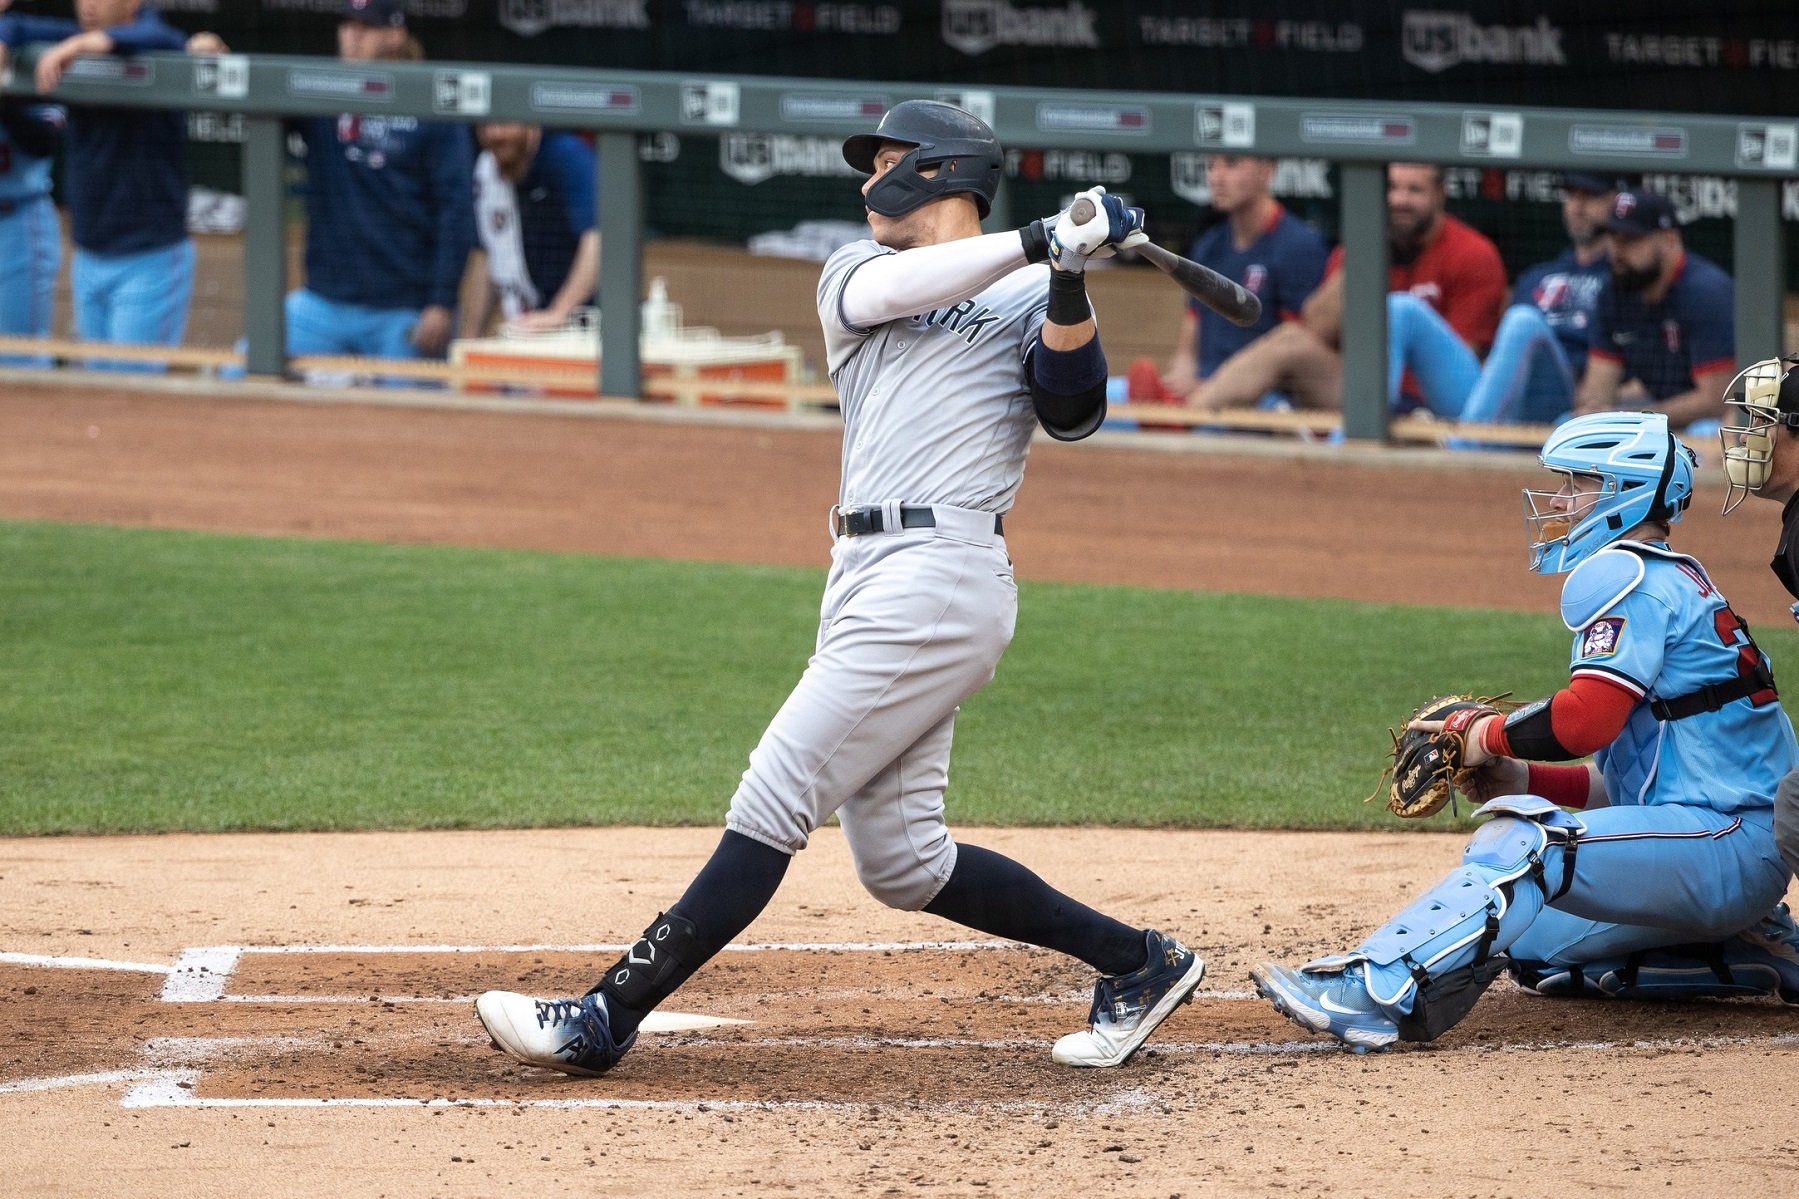 Robot umps would change game for Gary Sanchez